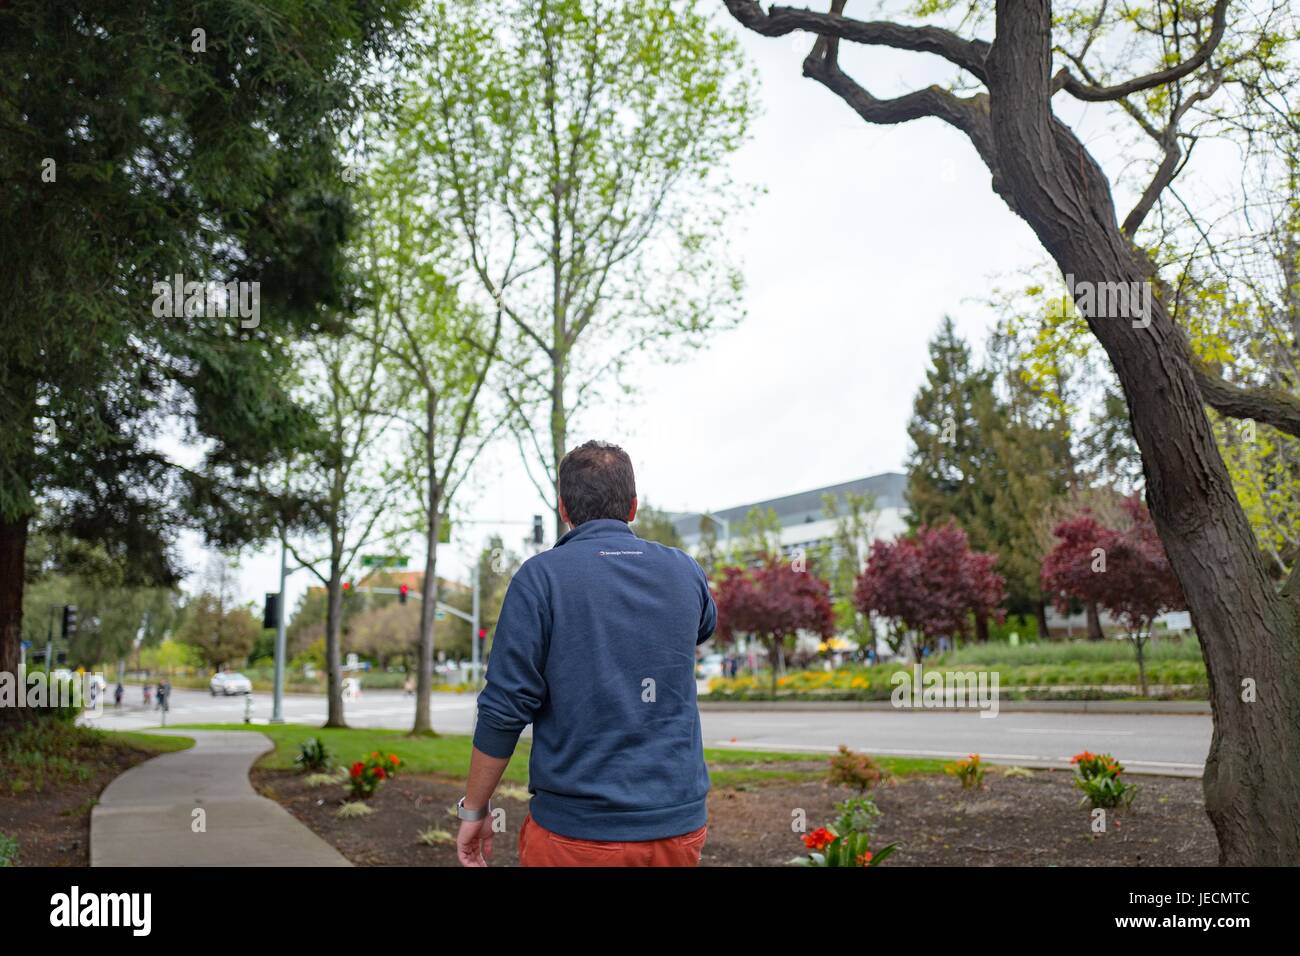 Via from behind of a Google Inc employee, known as a Googler, at the Googleplex, headquarters of Google Inc in the Silicon Valley town of Mountain View, California, April 7, 2017. Stock Photo